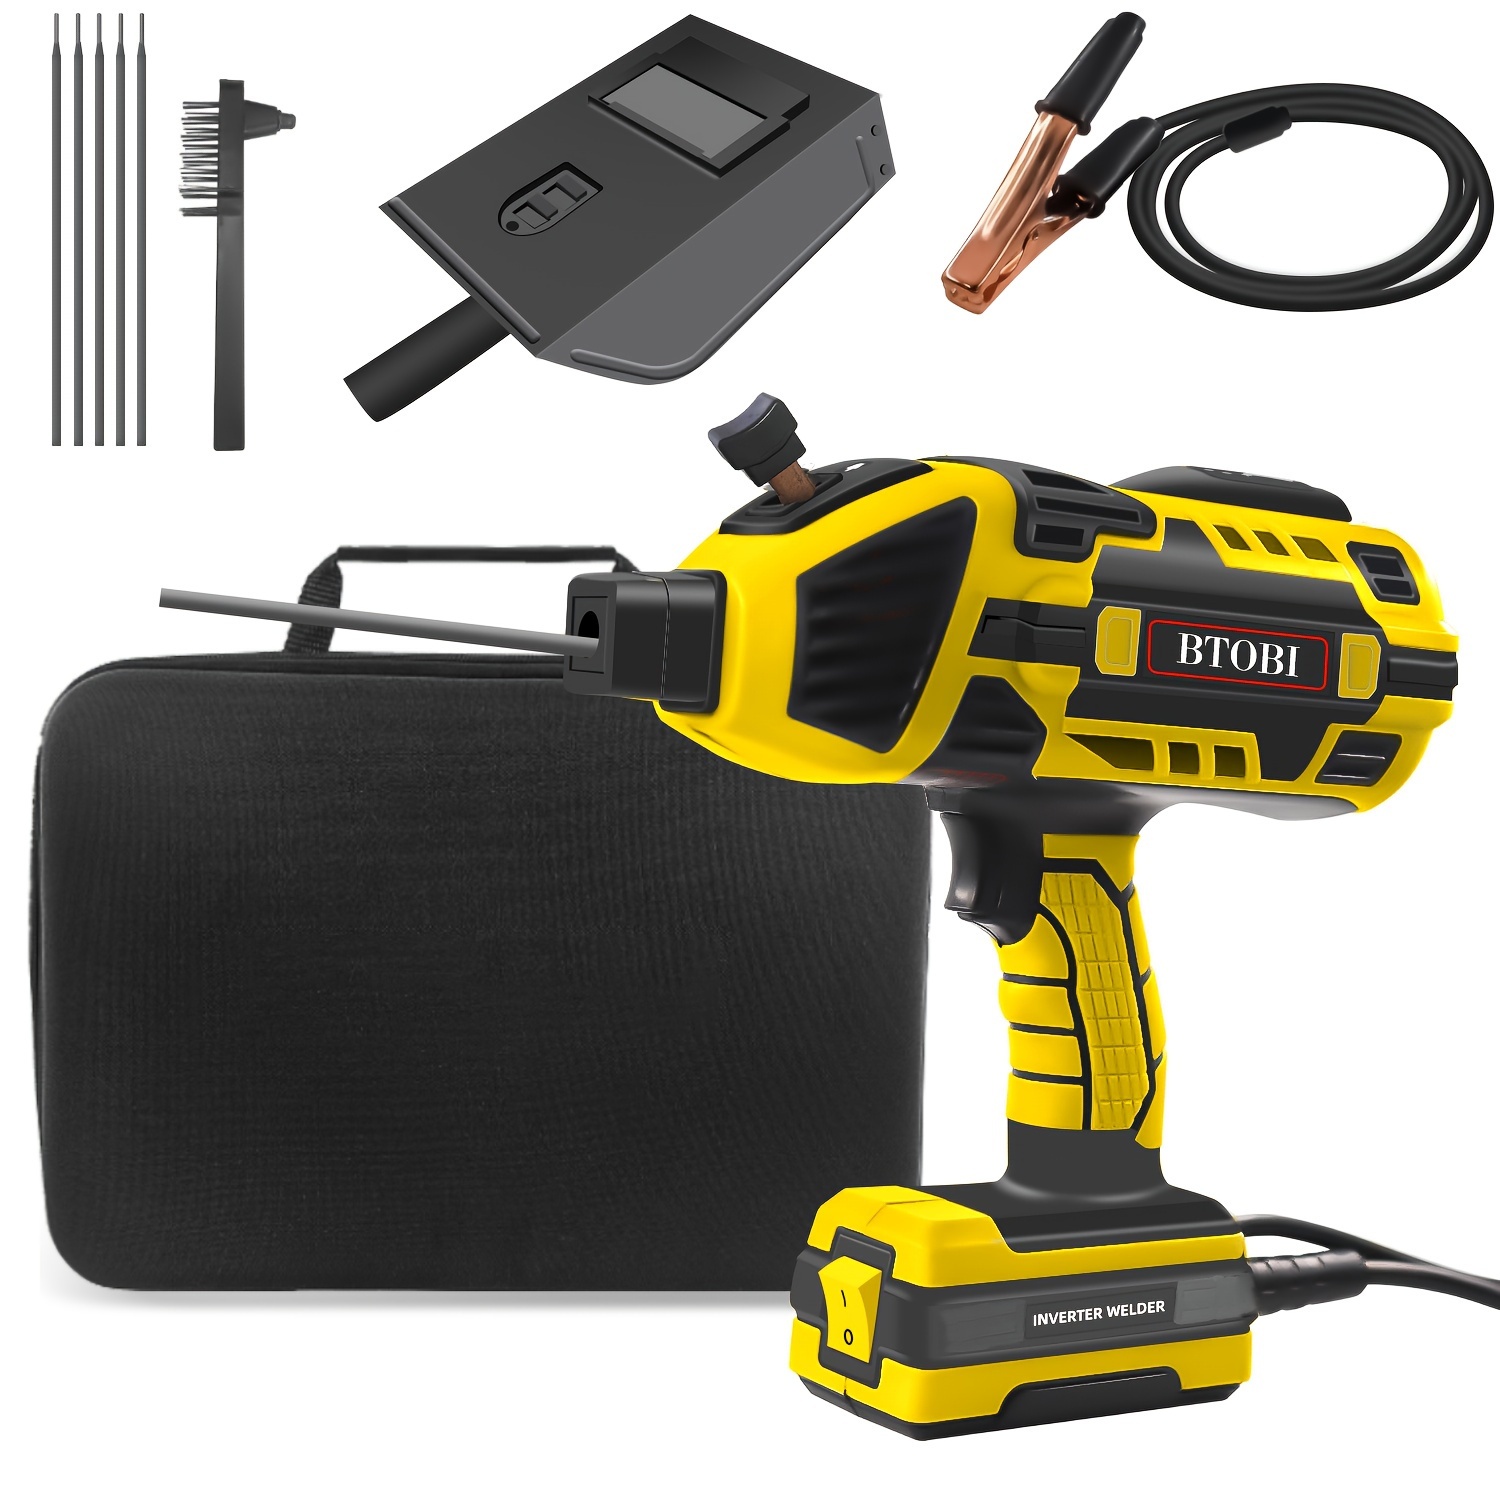 

1pc Portable Welding Machine, 110v Handheld Arc Welder With Igbt Inverter, Variable Current Control, Portable Arc Welding Gun For 3/32"-1/8" Rod, Welding Kit With Carrying Case